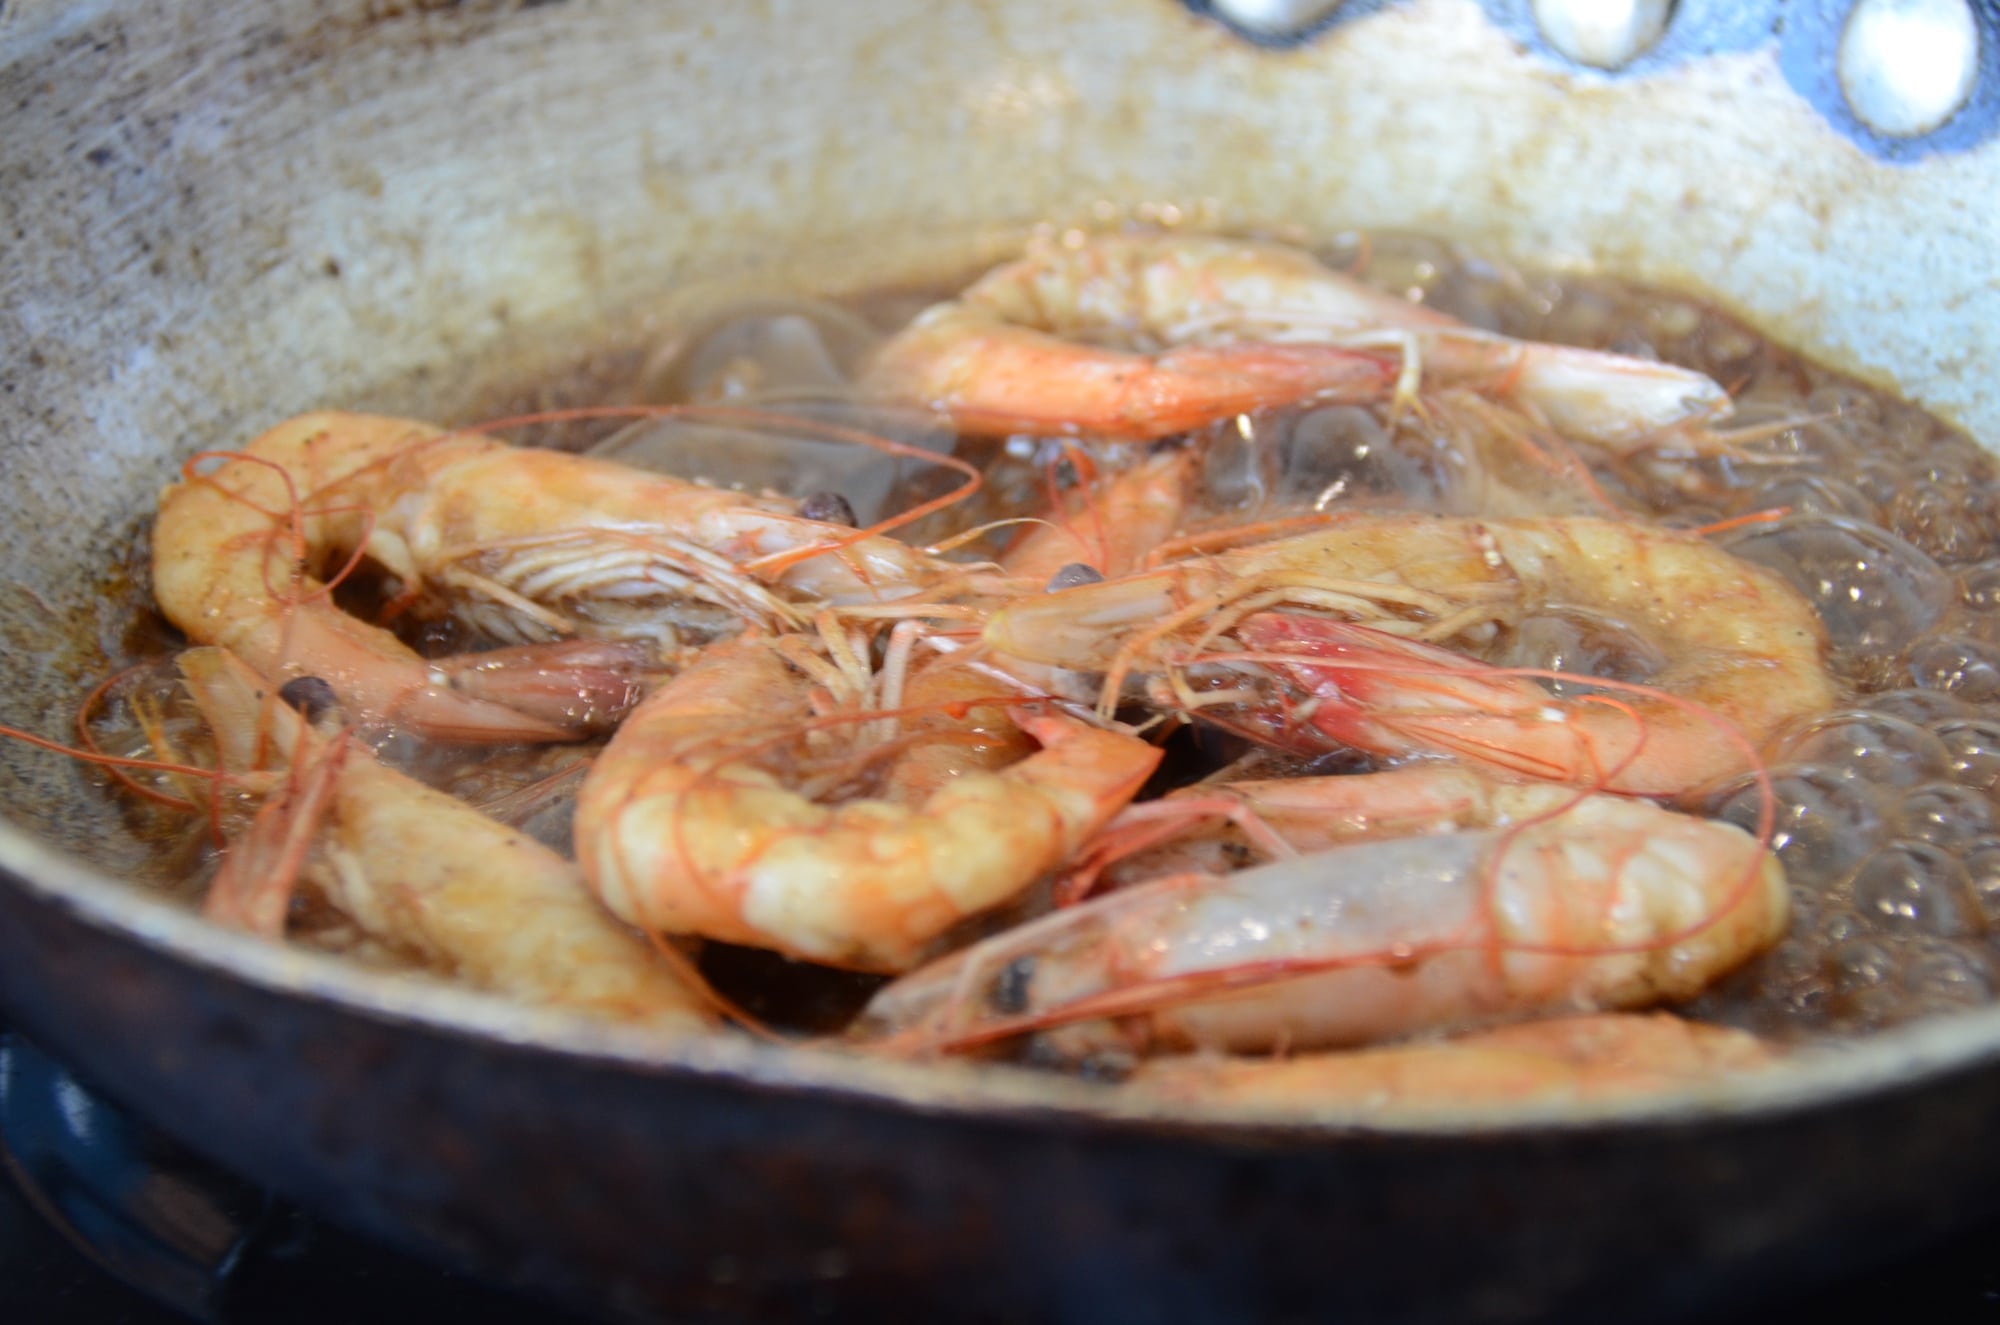 Image of shrimp being cooked in a sauce in a pan